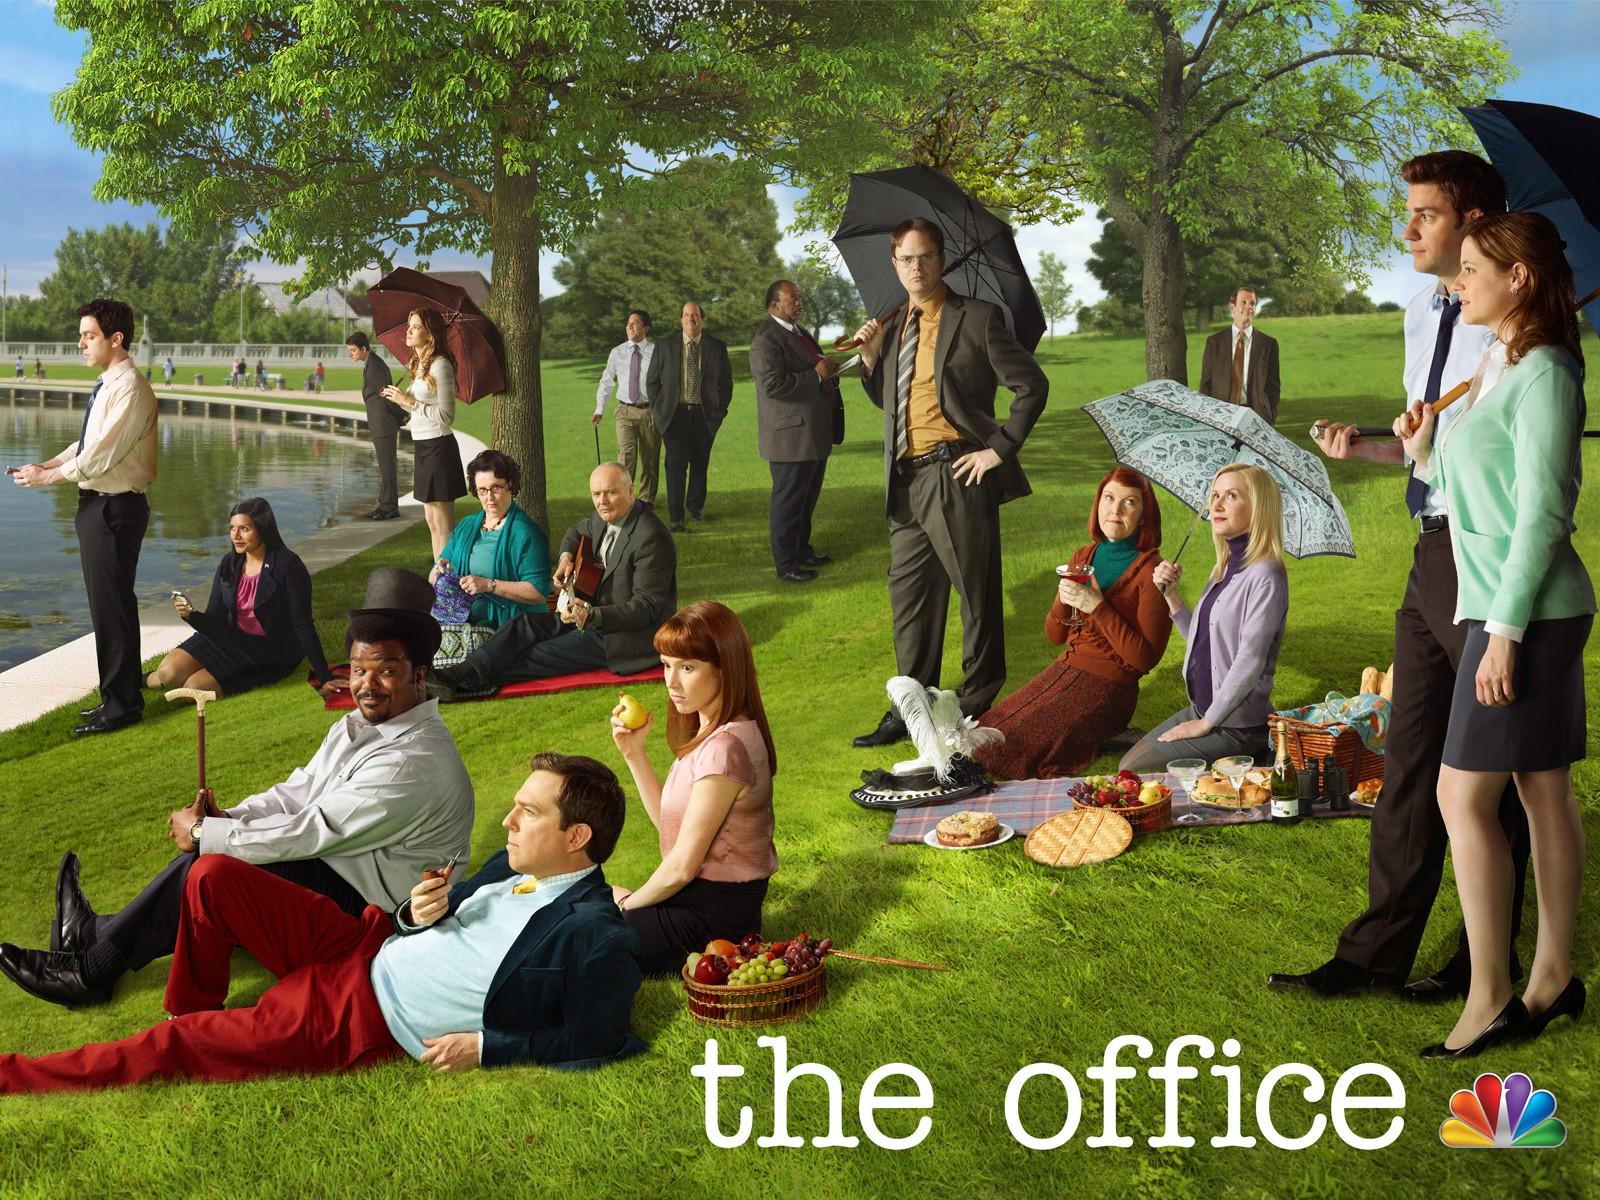 1600 x 1200 · jpeg - The Office (US) Wallpaper and Background Image | 1600x1200 | ID:420104 ...